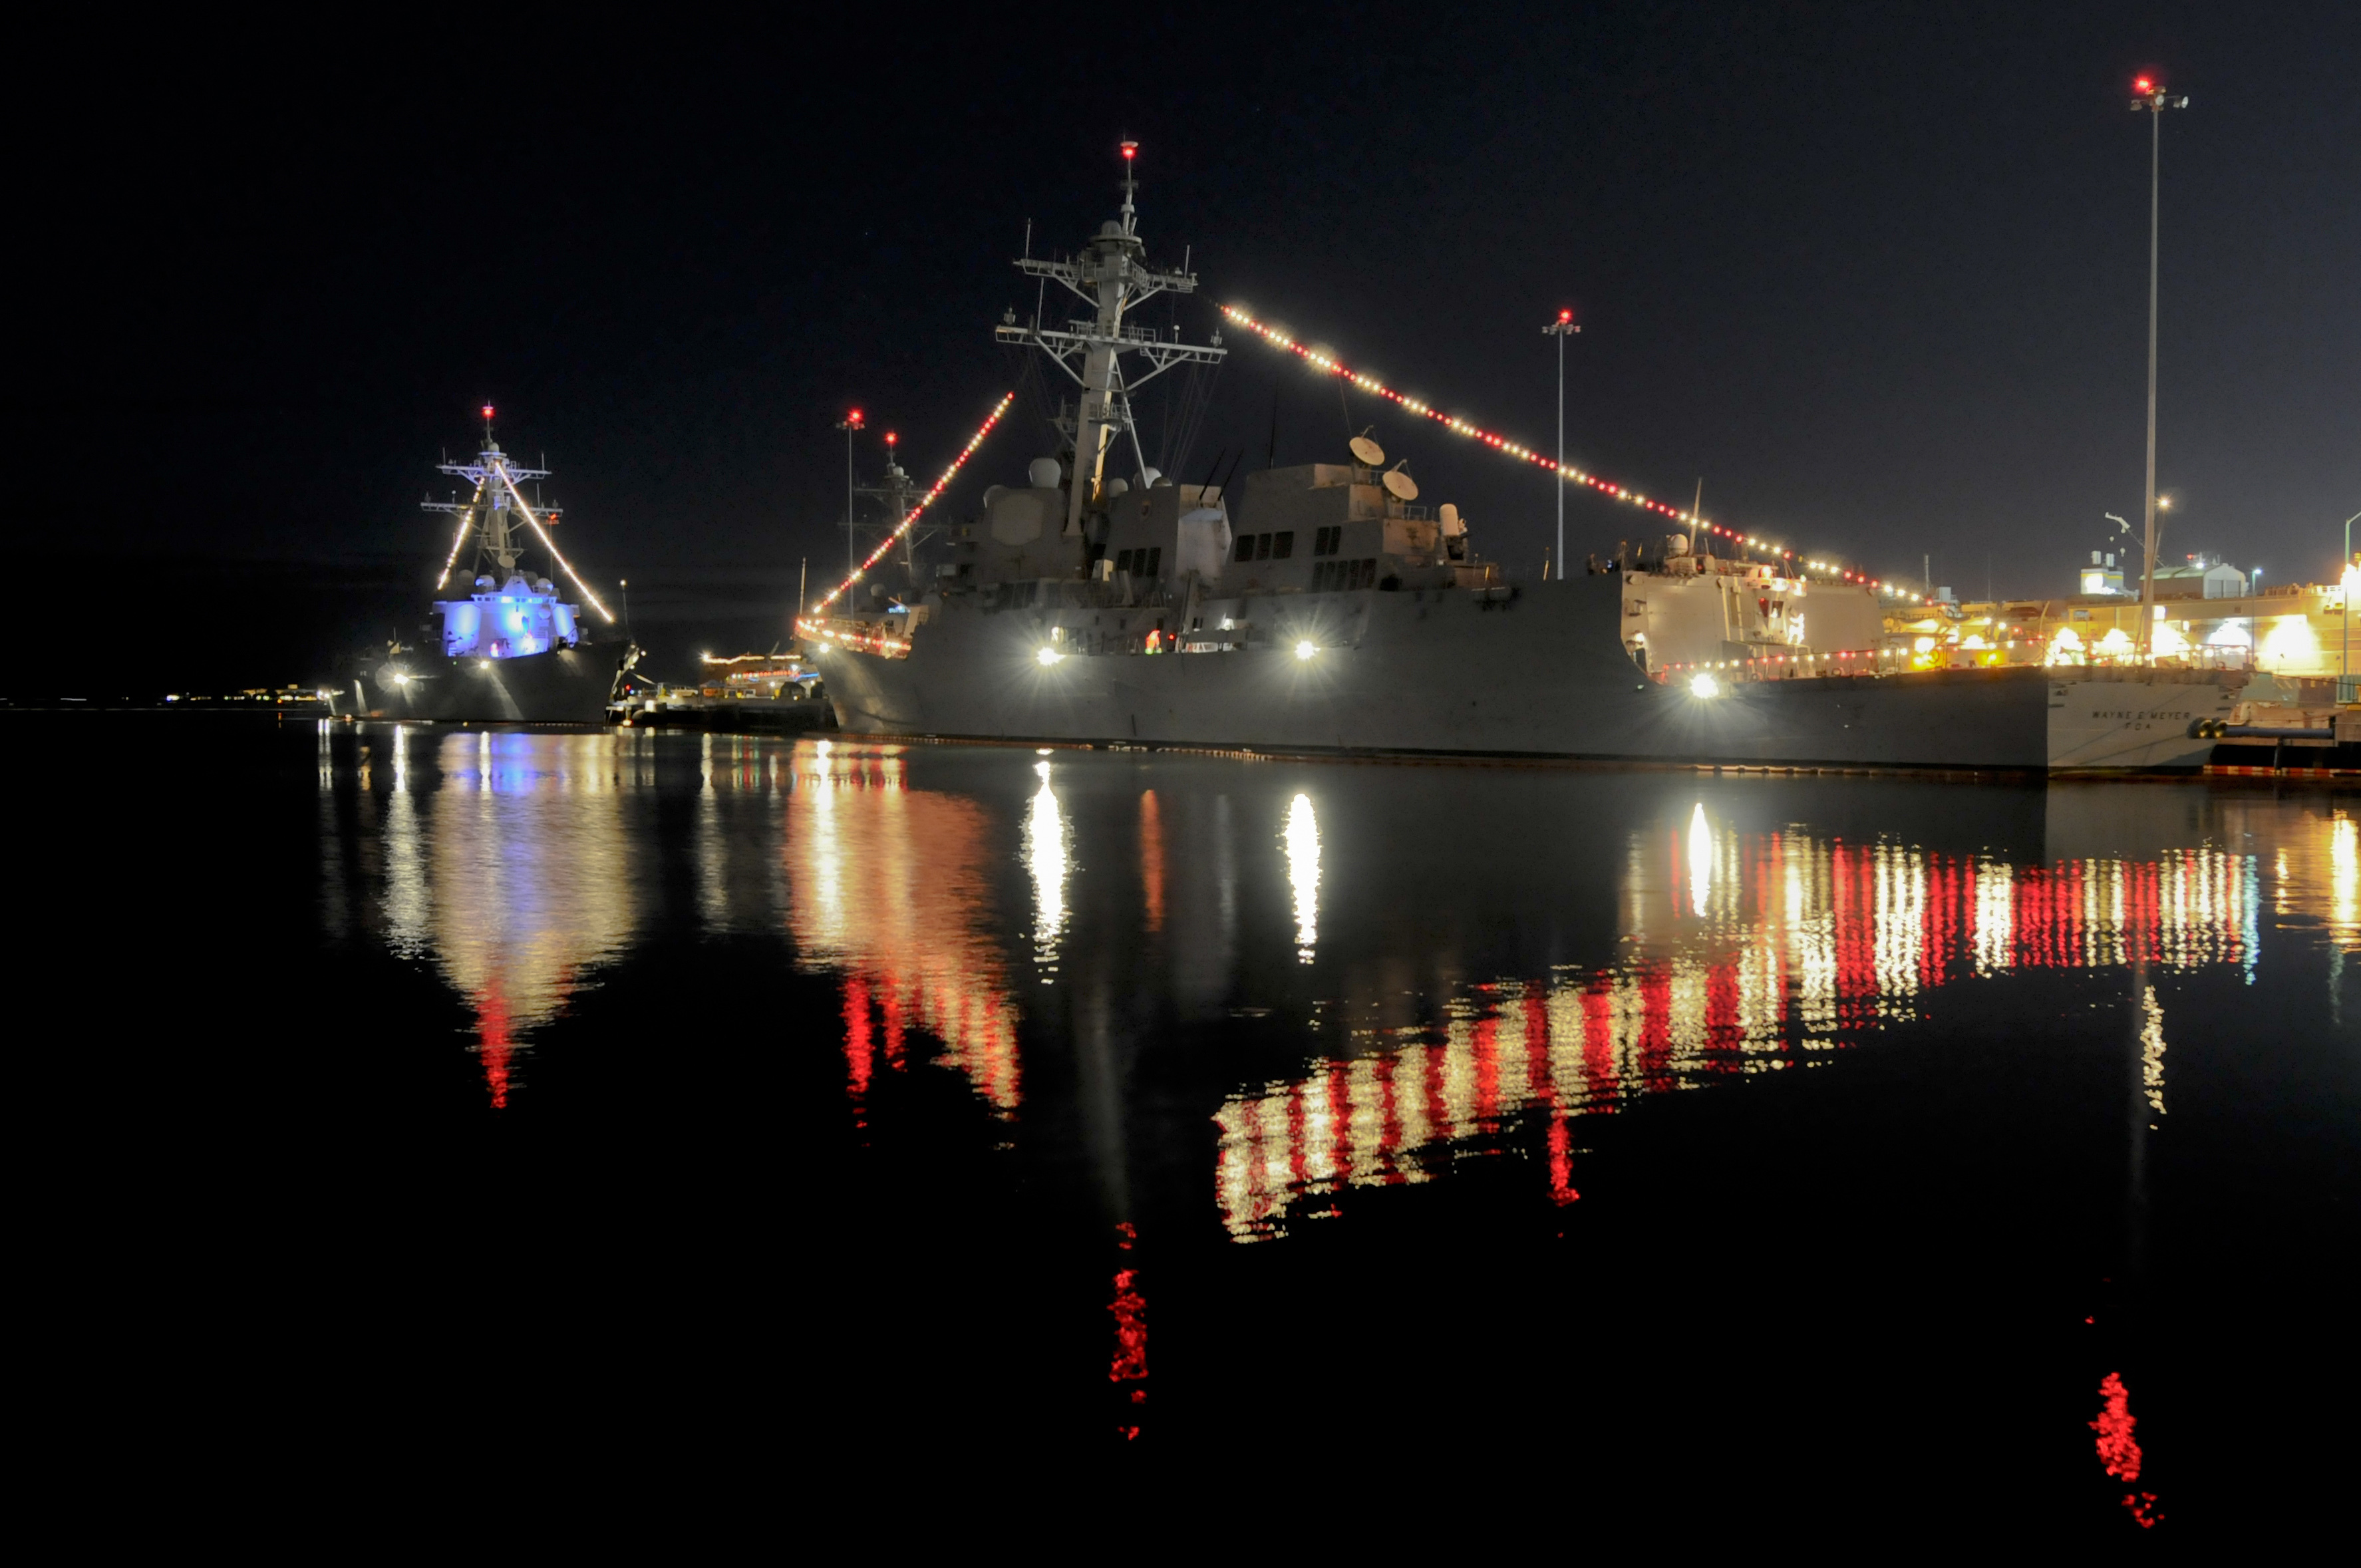 Two U.S. Navy ships are shown illuminated with holiday lights.